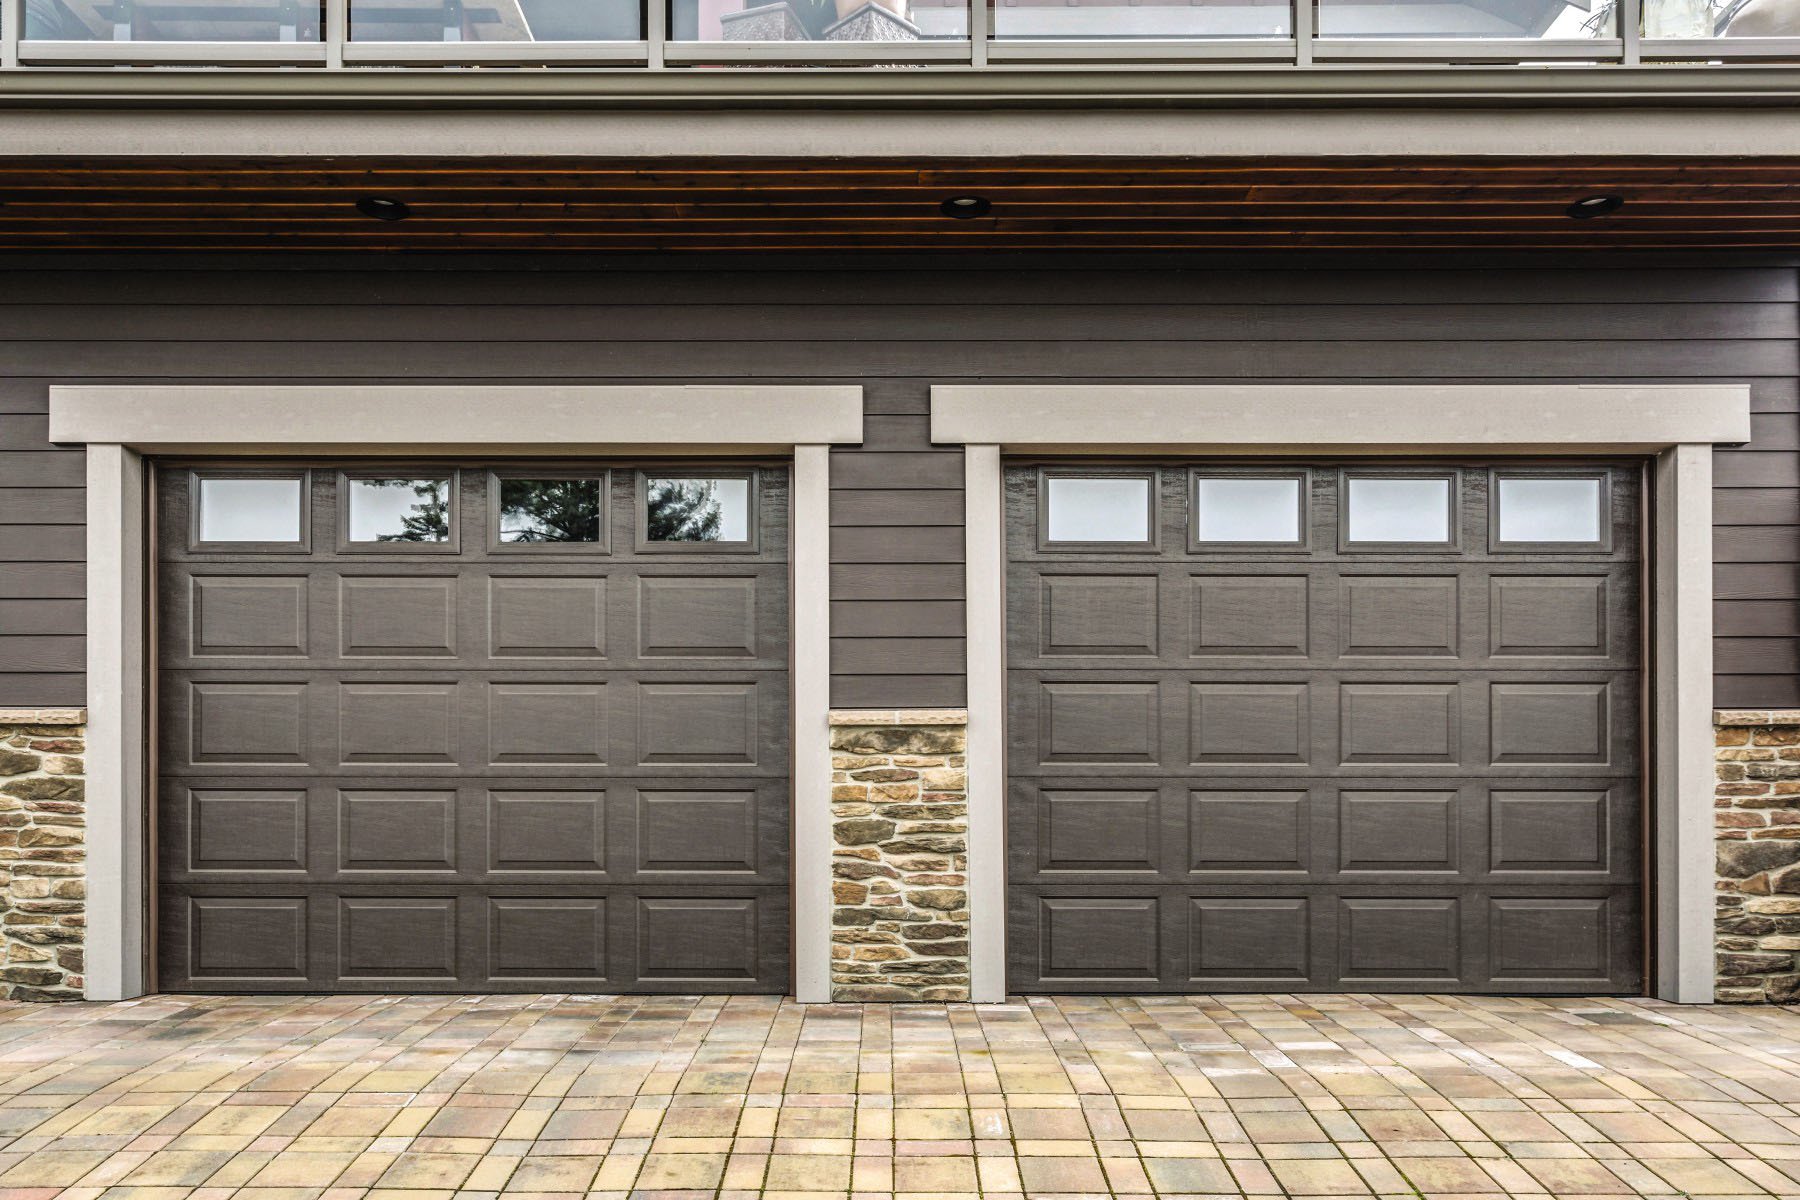 Repair Or Replace? How To Determine When Your Garage Needs To Go